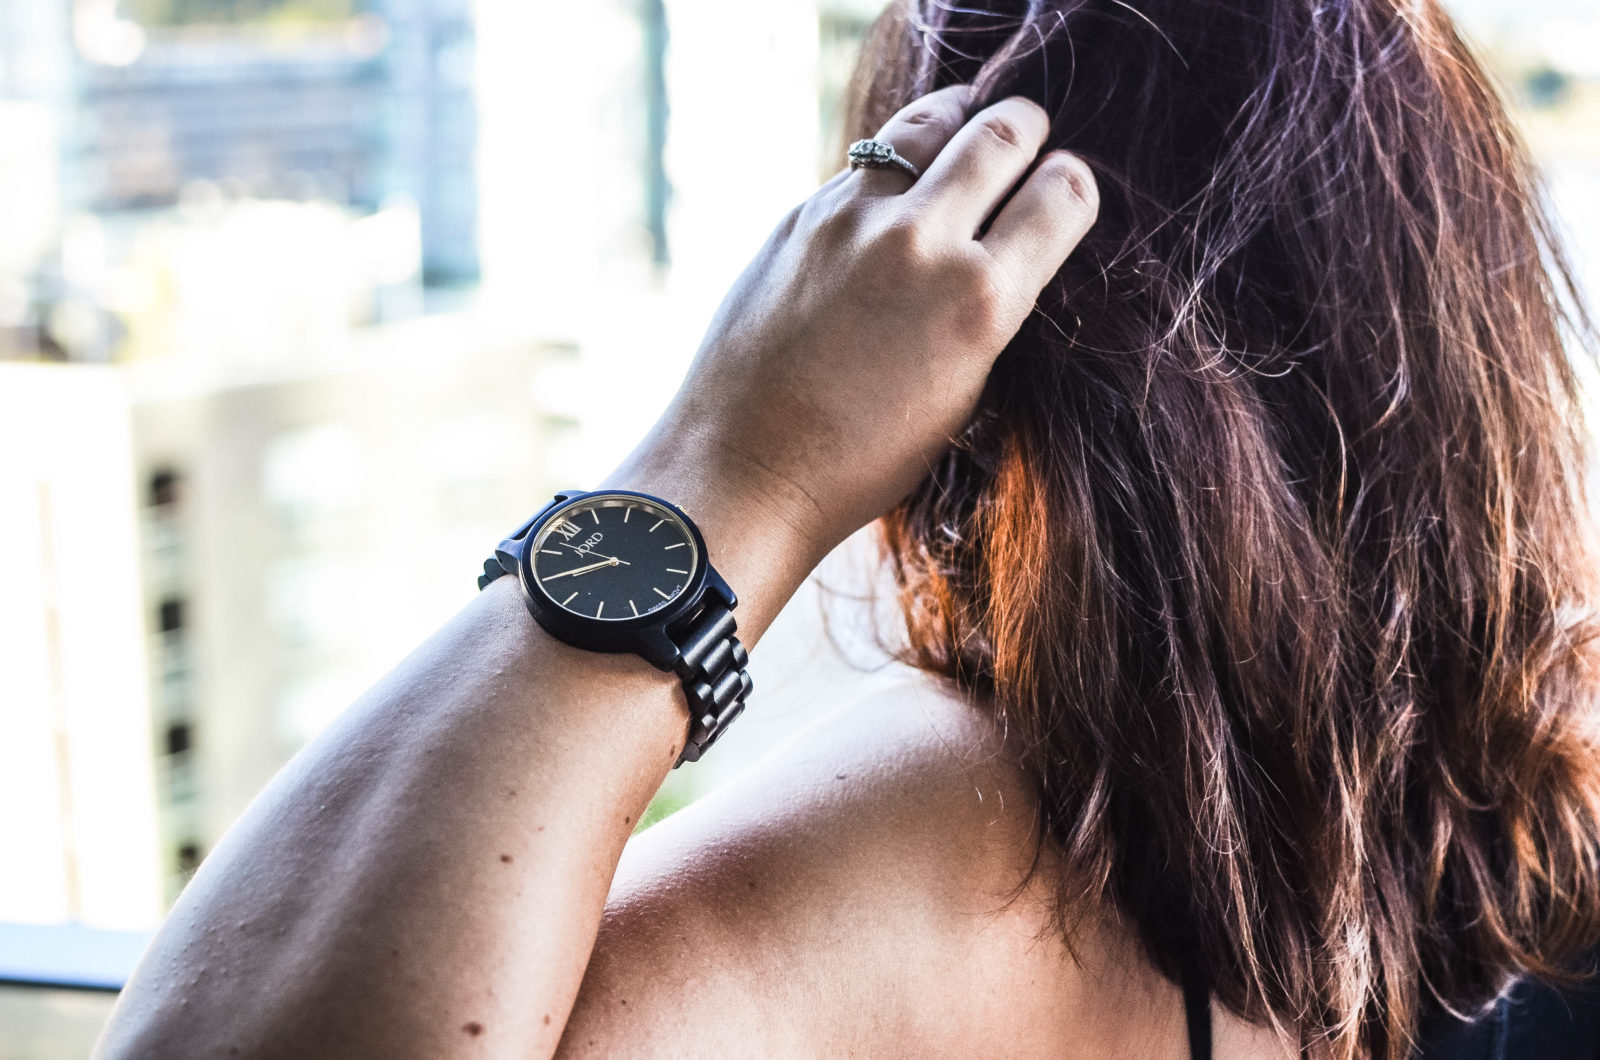 Get Instant Style with a Jord Wood Wrist Watch It's a lightweight, sporty accessory to be worn day or night. Win a $75 gift card today!